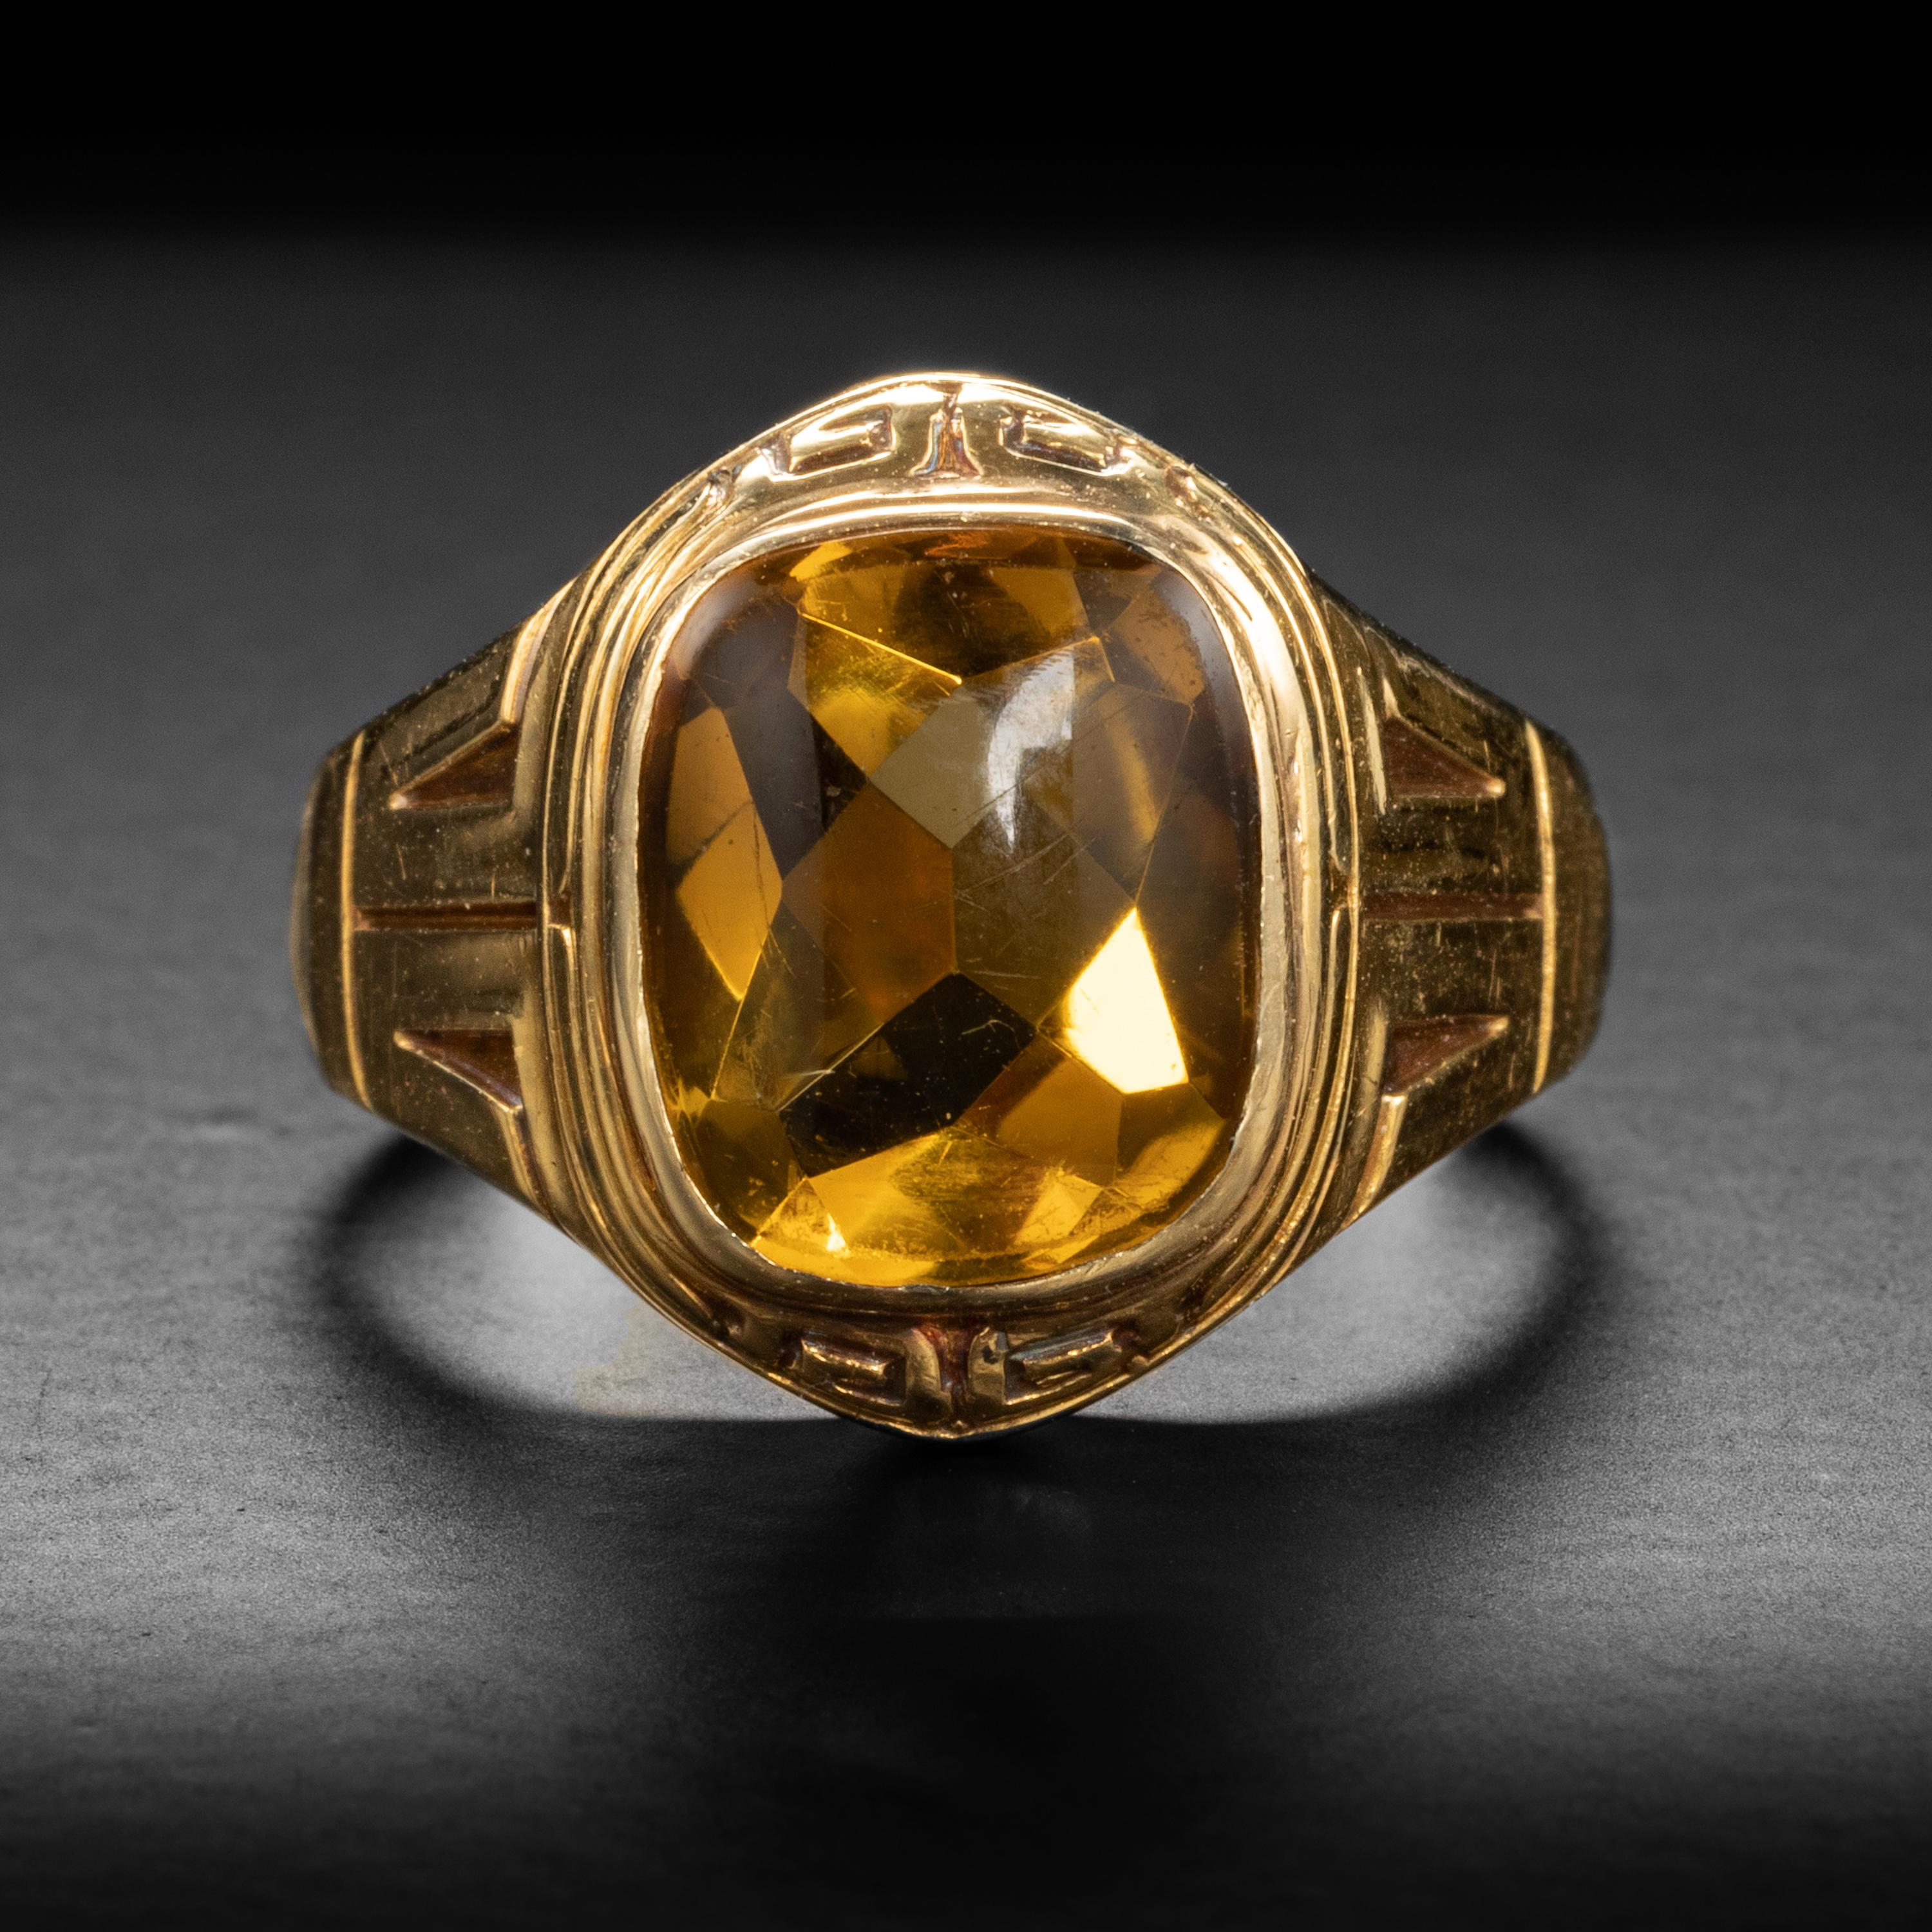 This men's citrine ring was created by hand in the Aret Deco era from 14K yellow gold.

Time has rendered the 14k yellow gold band butter-smooth. And has also favored the gloriously warm natural citrine gem. The rectangular-cut stone is faceted